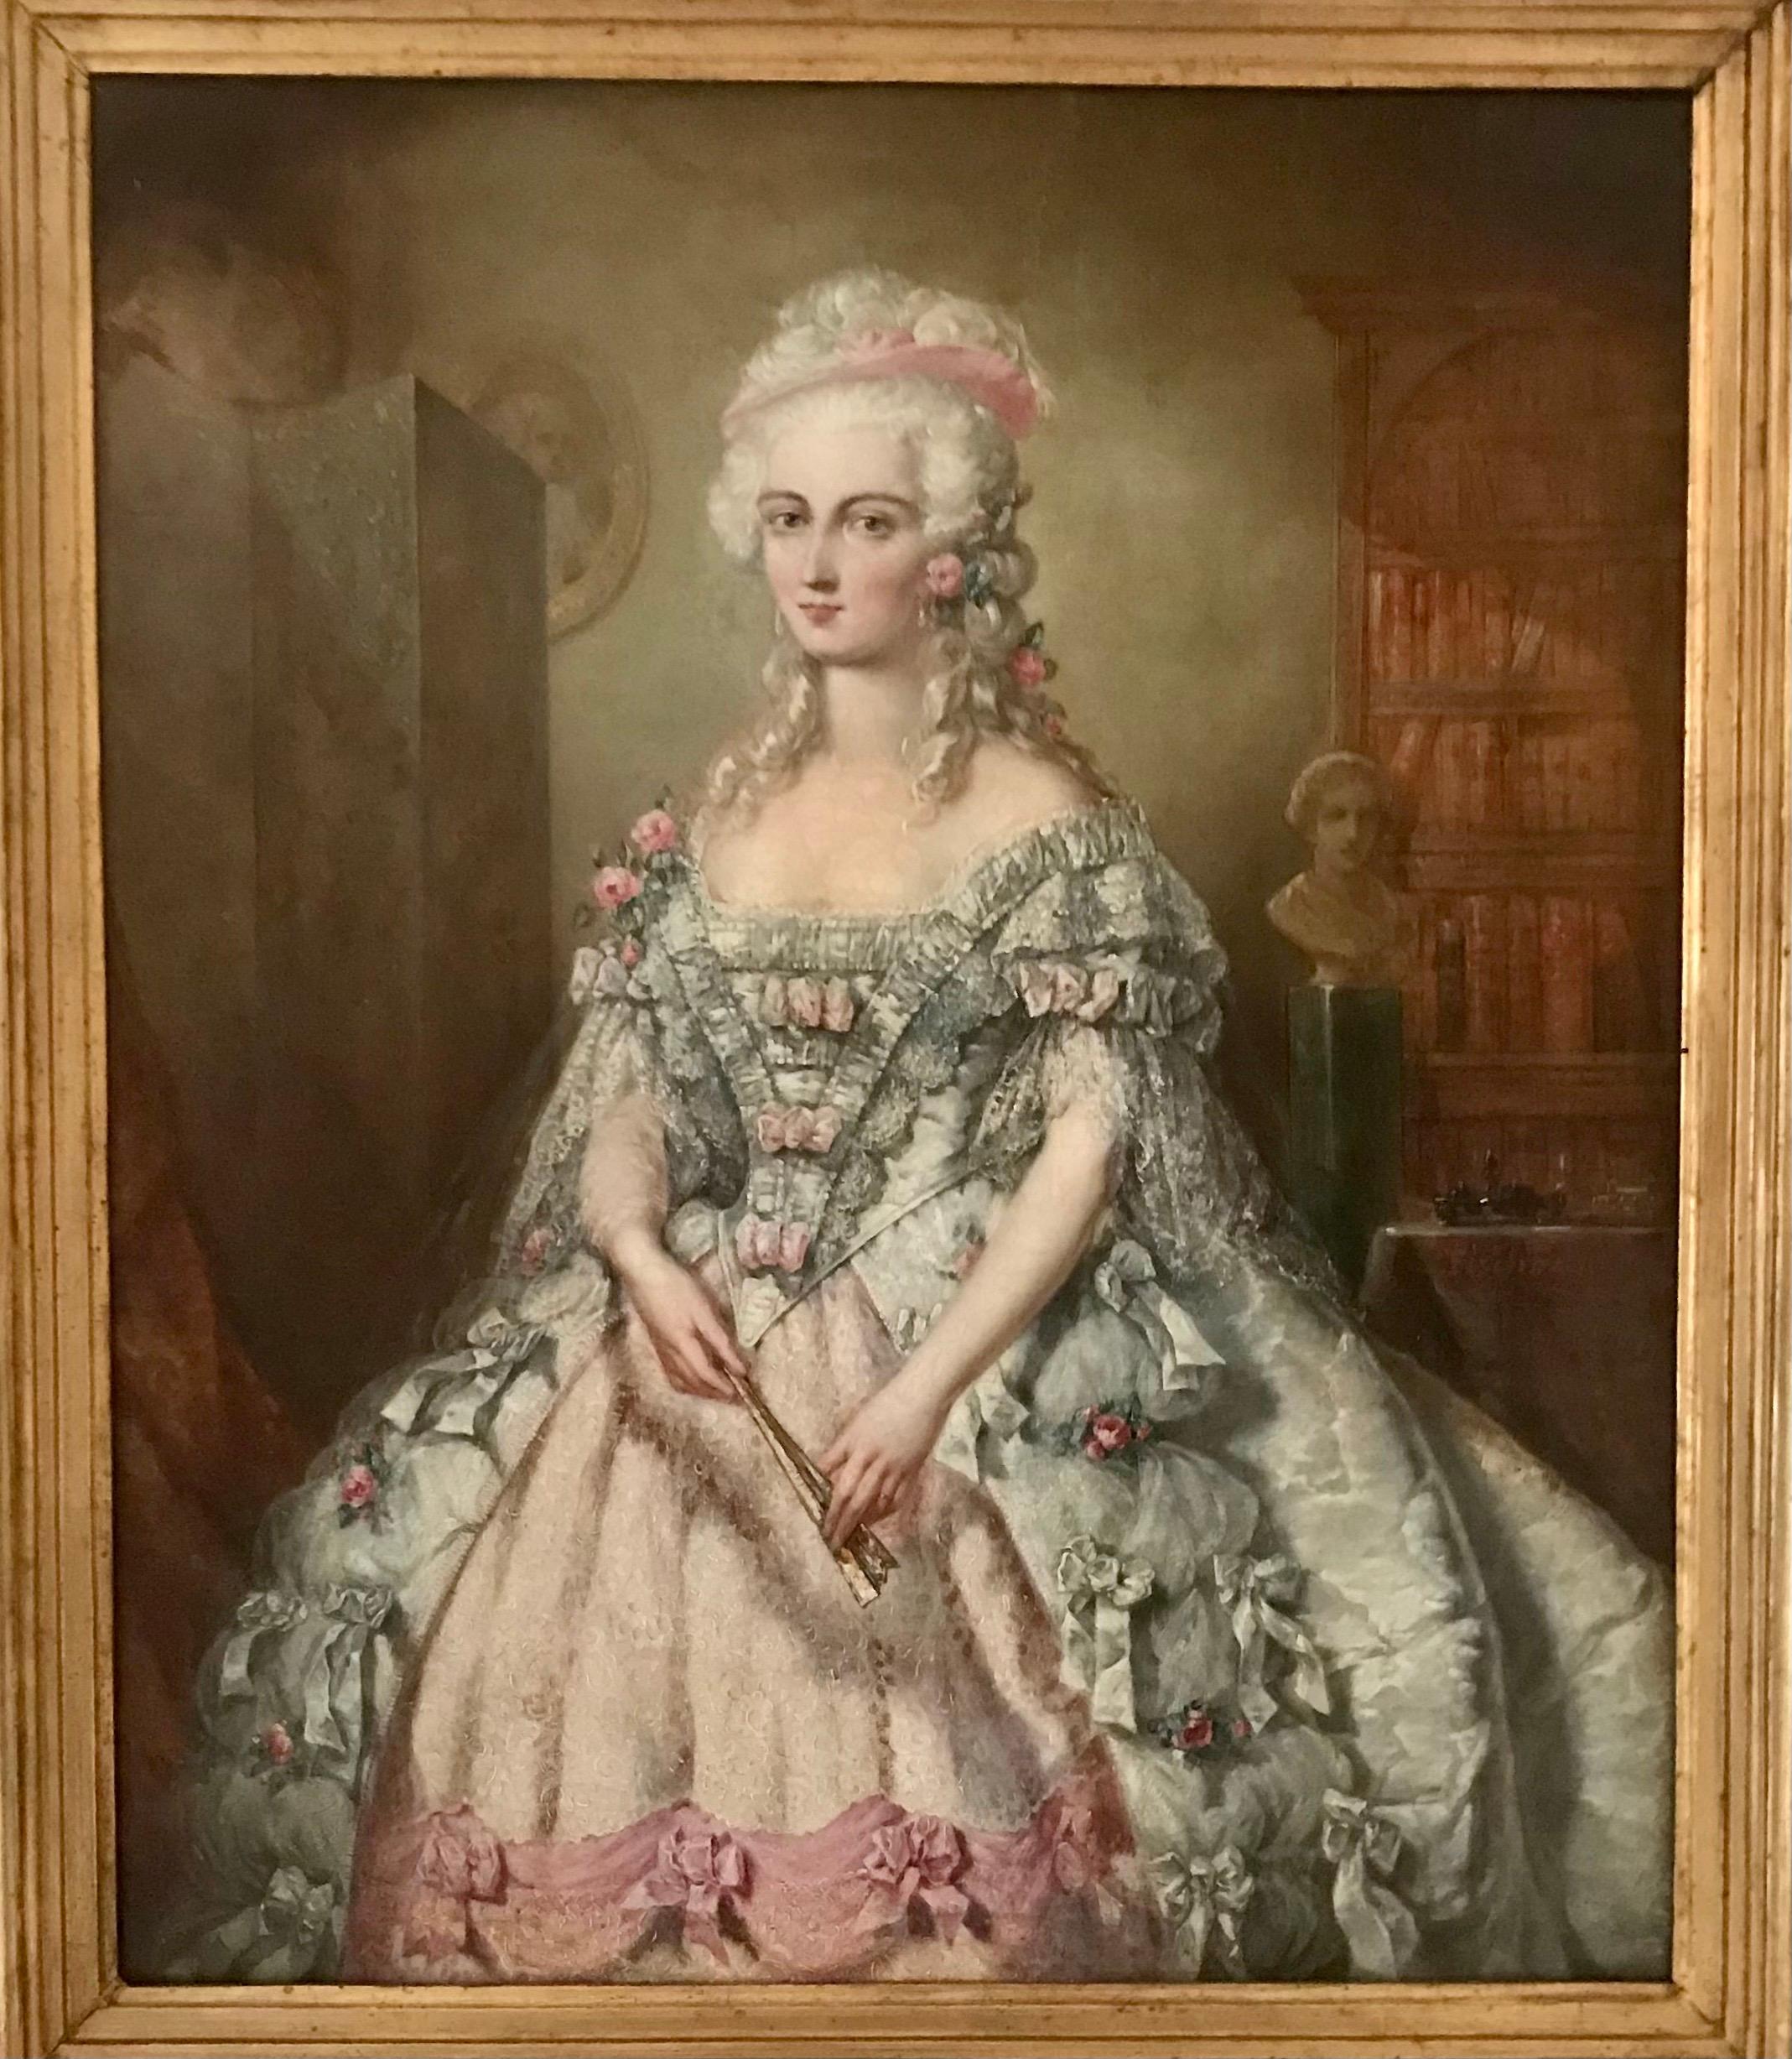 A studio portrait of aristocracy, half-length, wearing a cream and pink lace-trimmed dress, holding a folded hand fan.Painted by Johann Heinrich Tischbein.
German, mid-18th century.

Notes: Johann Heinrich Tischbein the Elder, called the